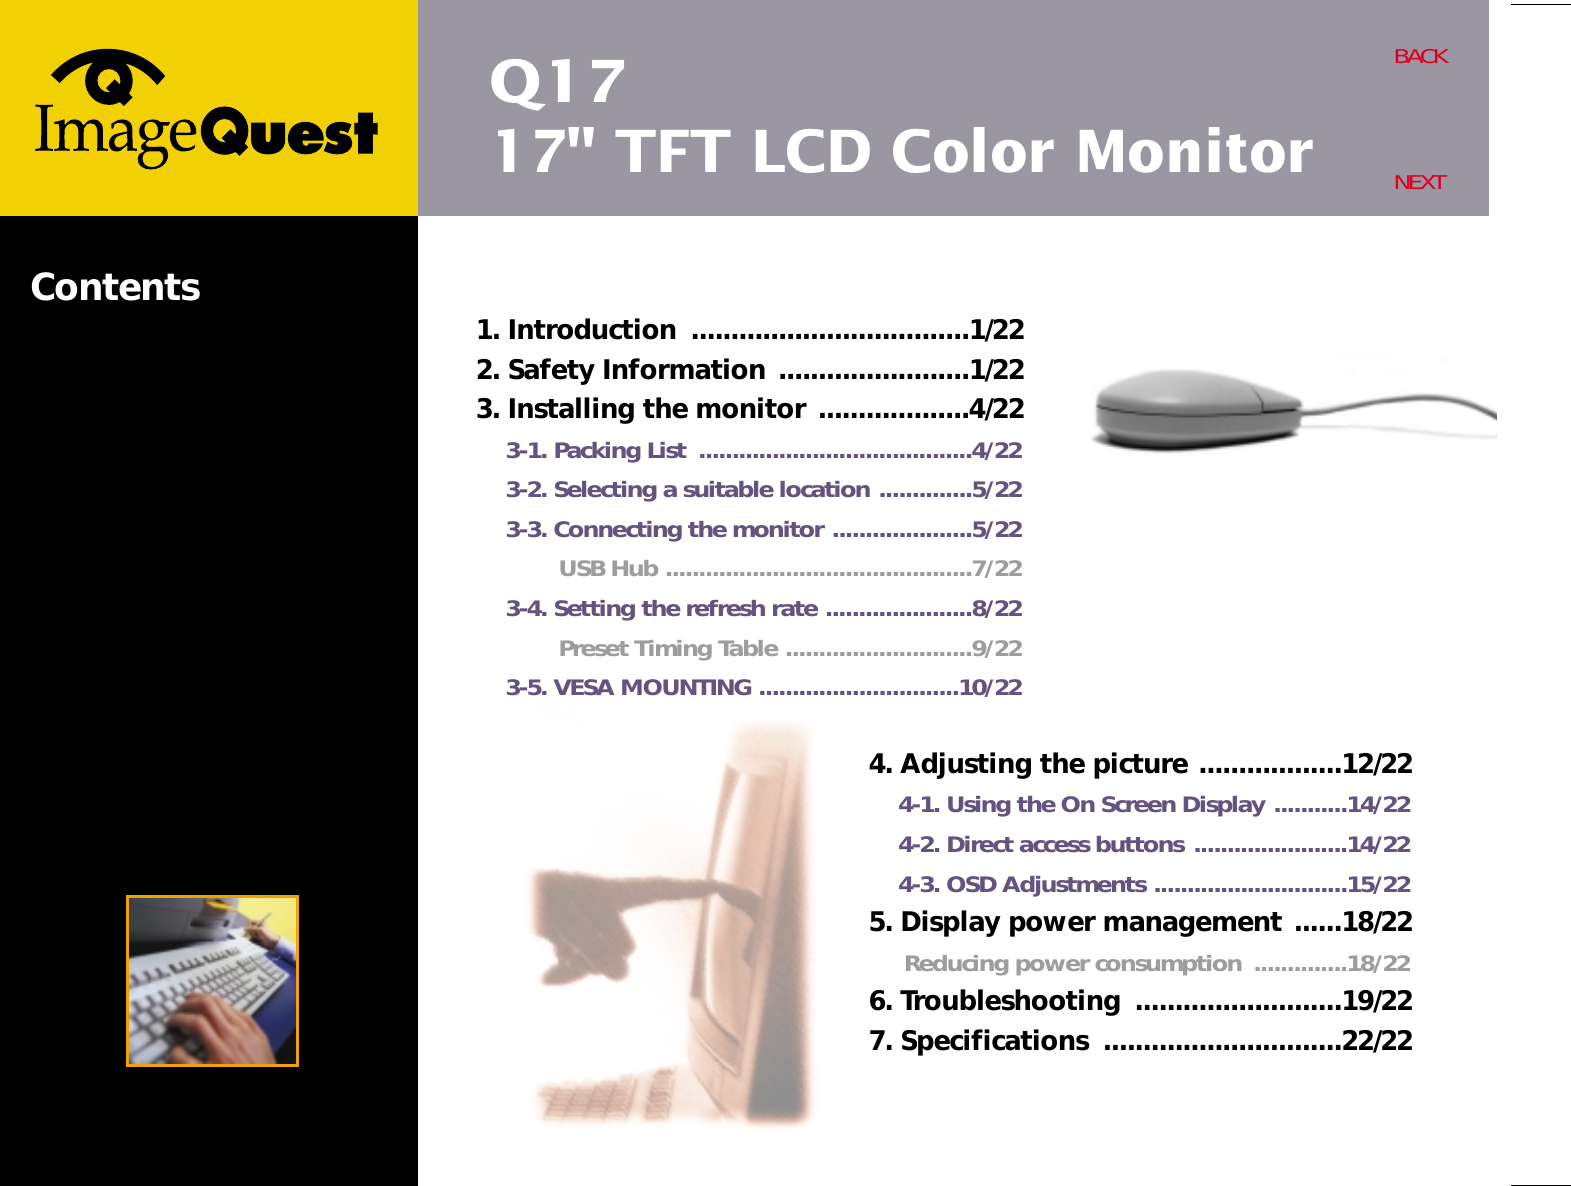 Q1717&quot; TFT LCD Color MonitorBACKNEXTContents4. Adjusting the picture ..................12/224-1. Using the On Screen Display ...........14/224-2. Direct access buttons .......................14/224-3. OSD Adjustments .............................15/225. Display power management ......18/22Reducing power consumption  ..............18/226. Troubleshooting  ..........................19/227. Specifications  ..............................22/221. Introduction  ...................................1/222. Safety Information ........................1/223. Installing the monitor ...................4/223-1. Packing List  .........................................4/223-2. Selecting a suitable location ..............5/223-3. Connecting the monitor .....................5/22USB Hub ..............................................7/223-4. Setting the refresh rate ......................8/22Preset Timing Table ............................9/223-5. VESA MOUNTING ..............................10/22